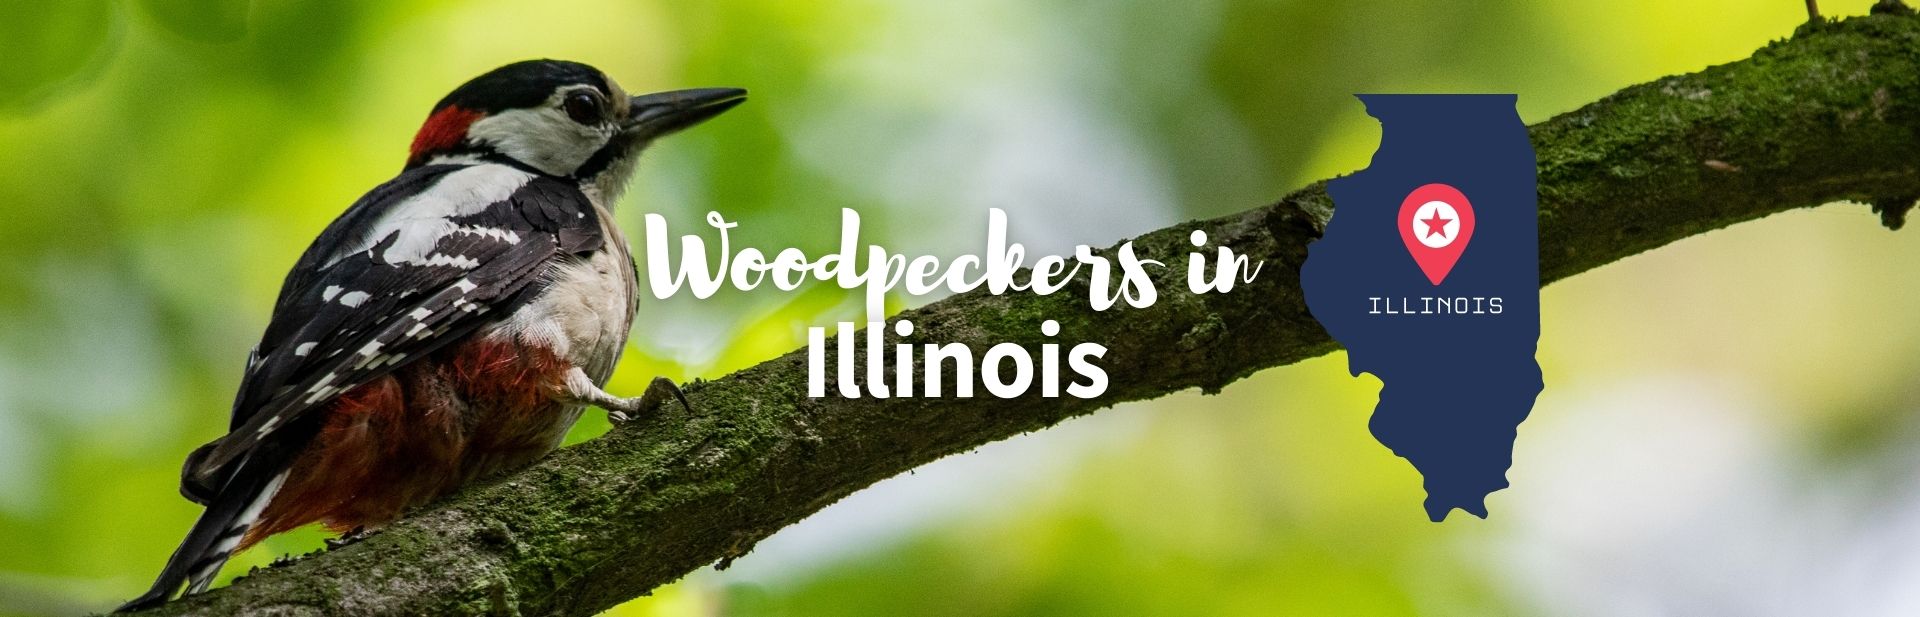 7 Amazing Woodpeckers in Illinois (ID Guide with Photos)